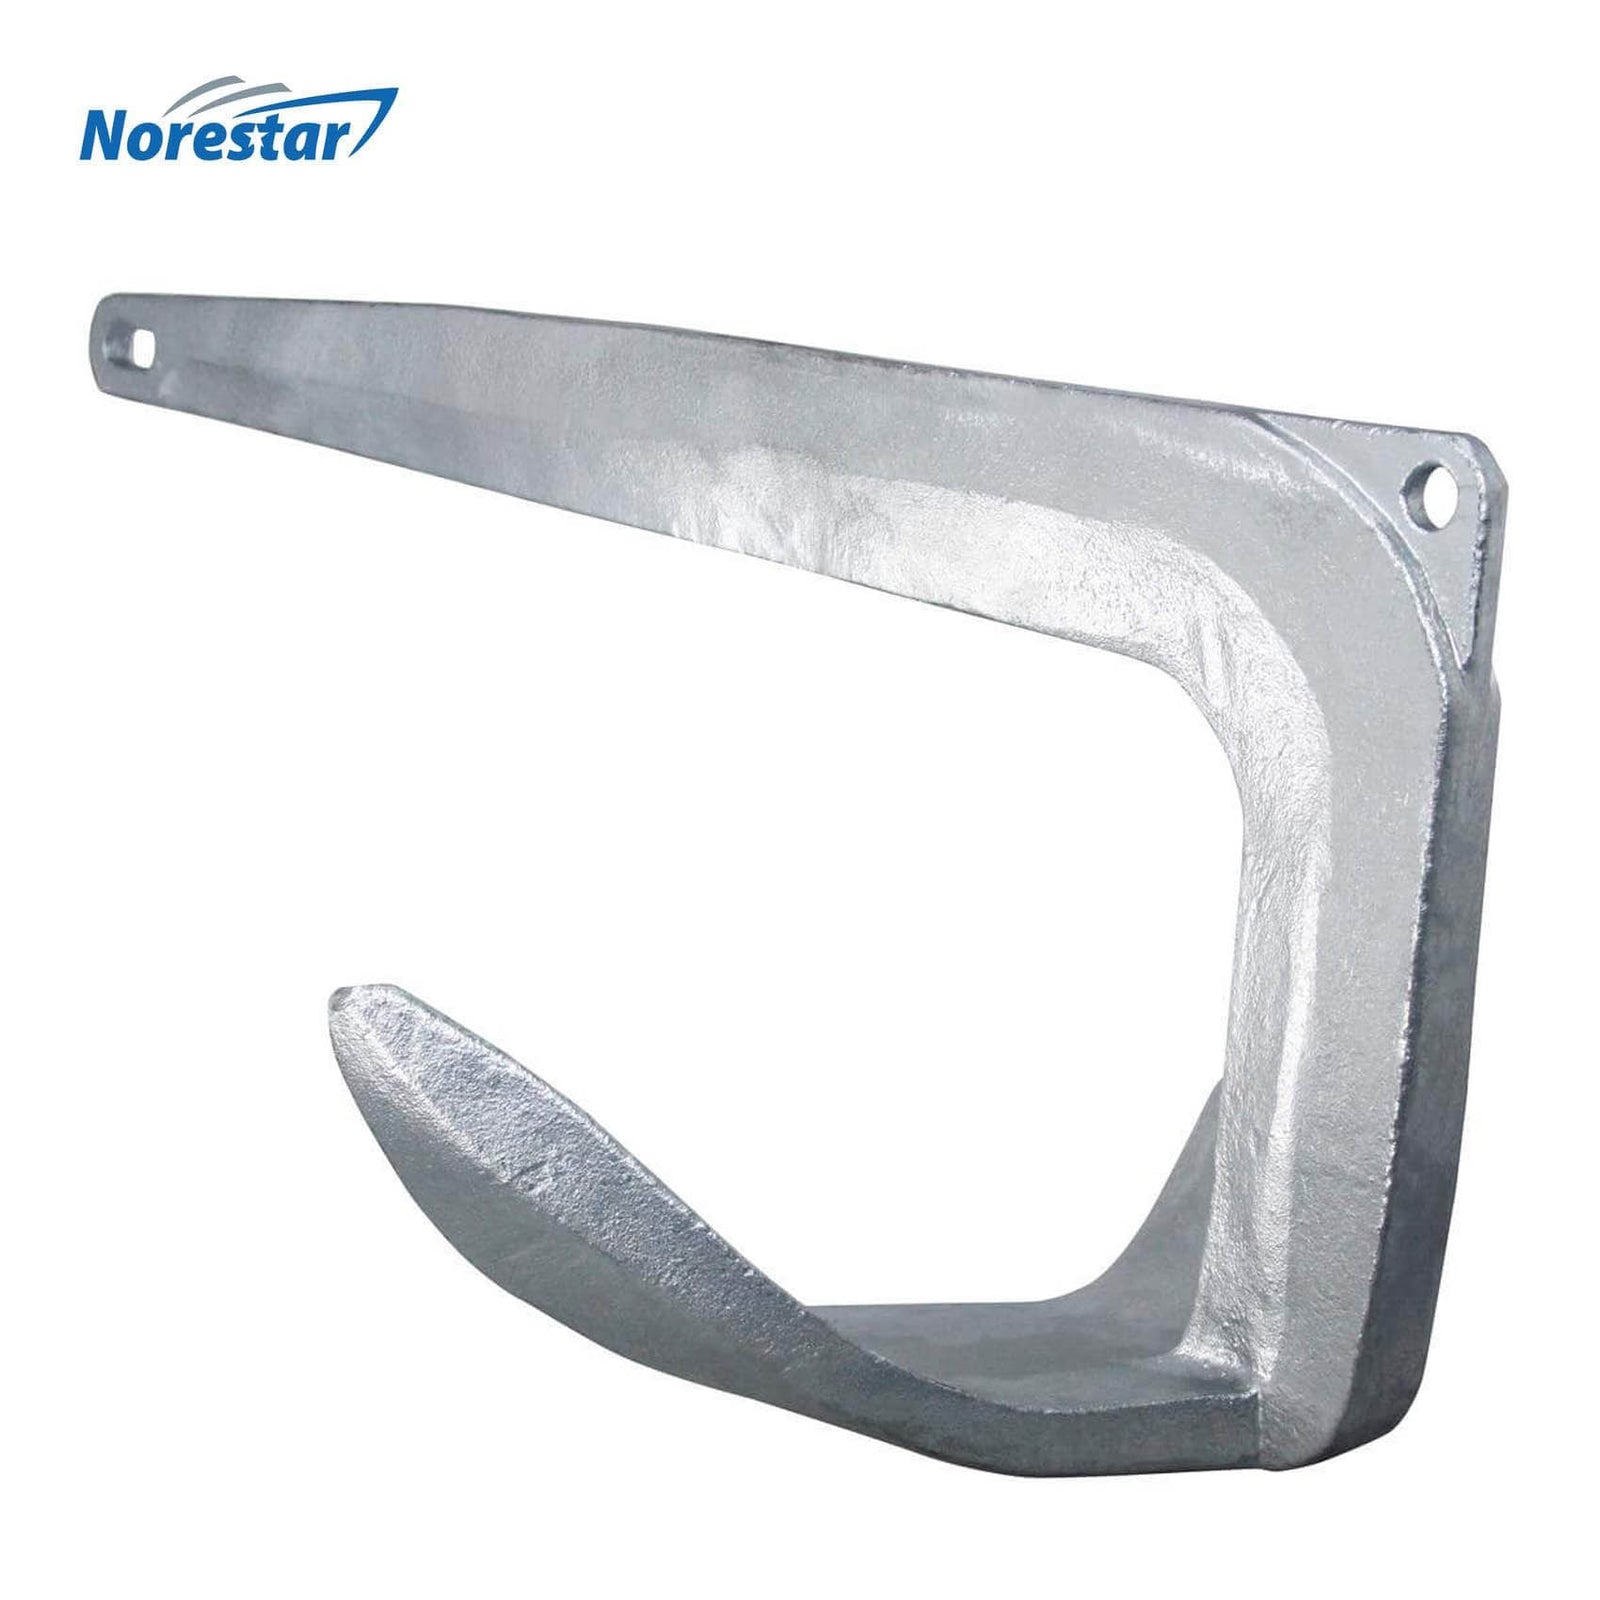 Galvanized Steel Bruce/Claw Boat Anchor by Norestar